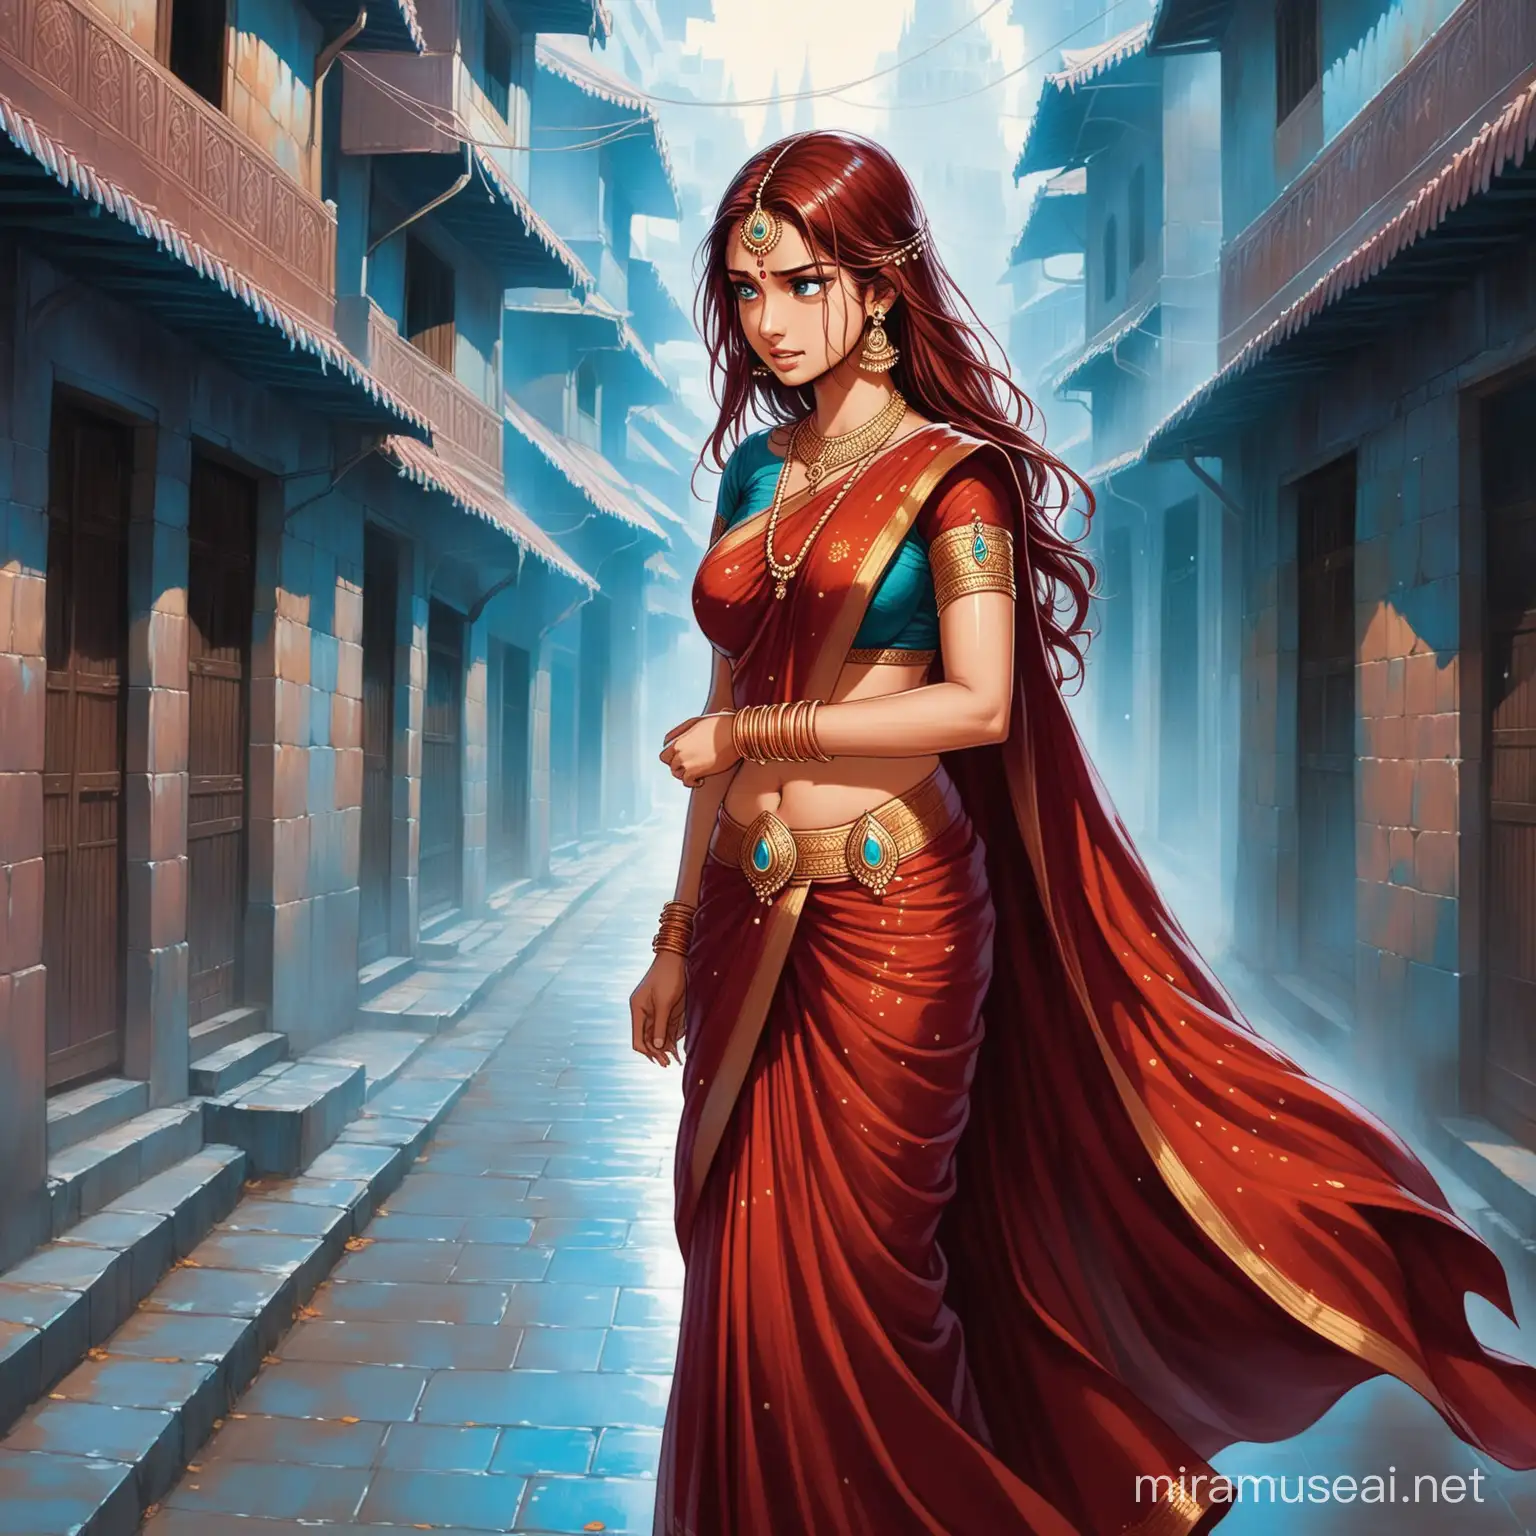 SOUTH INDIAN GODDESS IN RED SAREE CRYING , fantasy, forgotten realms, wiry, auburn hair, dark robes with silver and lightblue highlight, symbol of selune walking in a street 